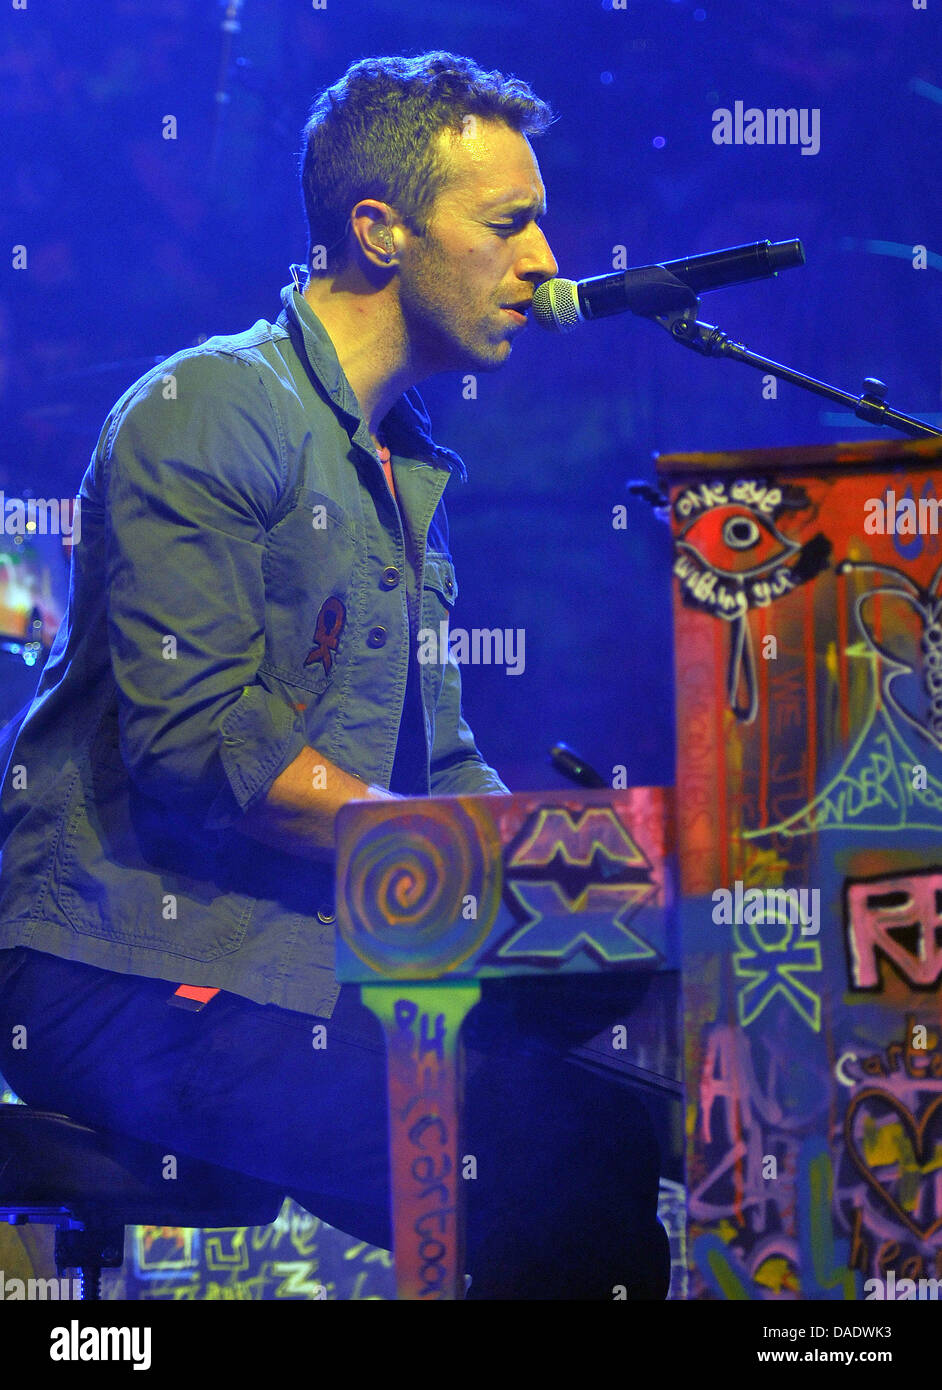 Singer Chris Martin of the band Coldplay plays piano during a concert at  the 'E-Werk' in Cologne, Germany, 02 November 2011. Tickets for the concert  were given to radio listeners and were